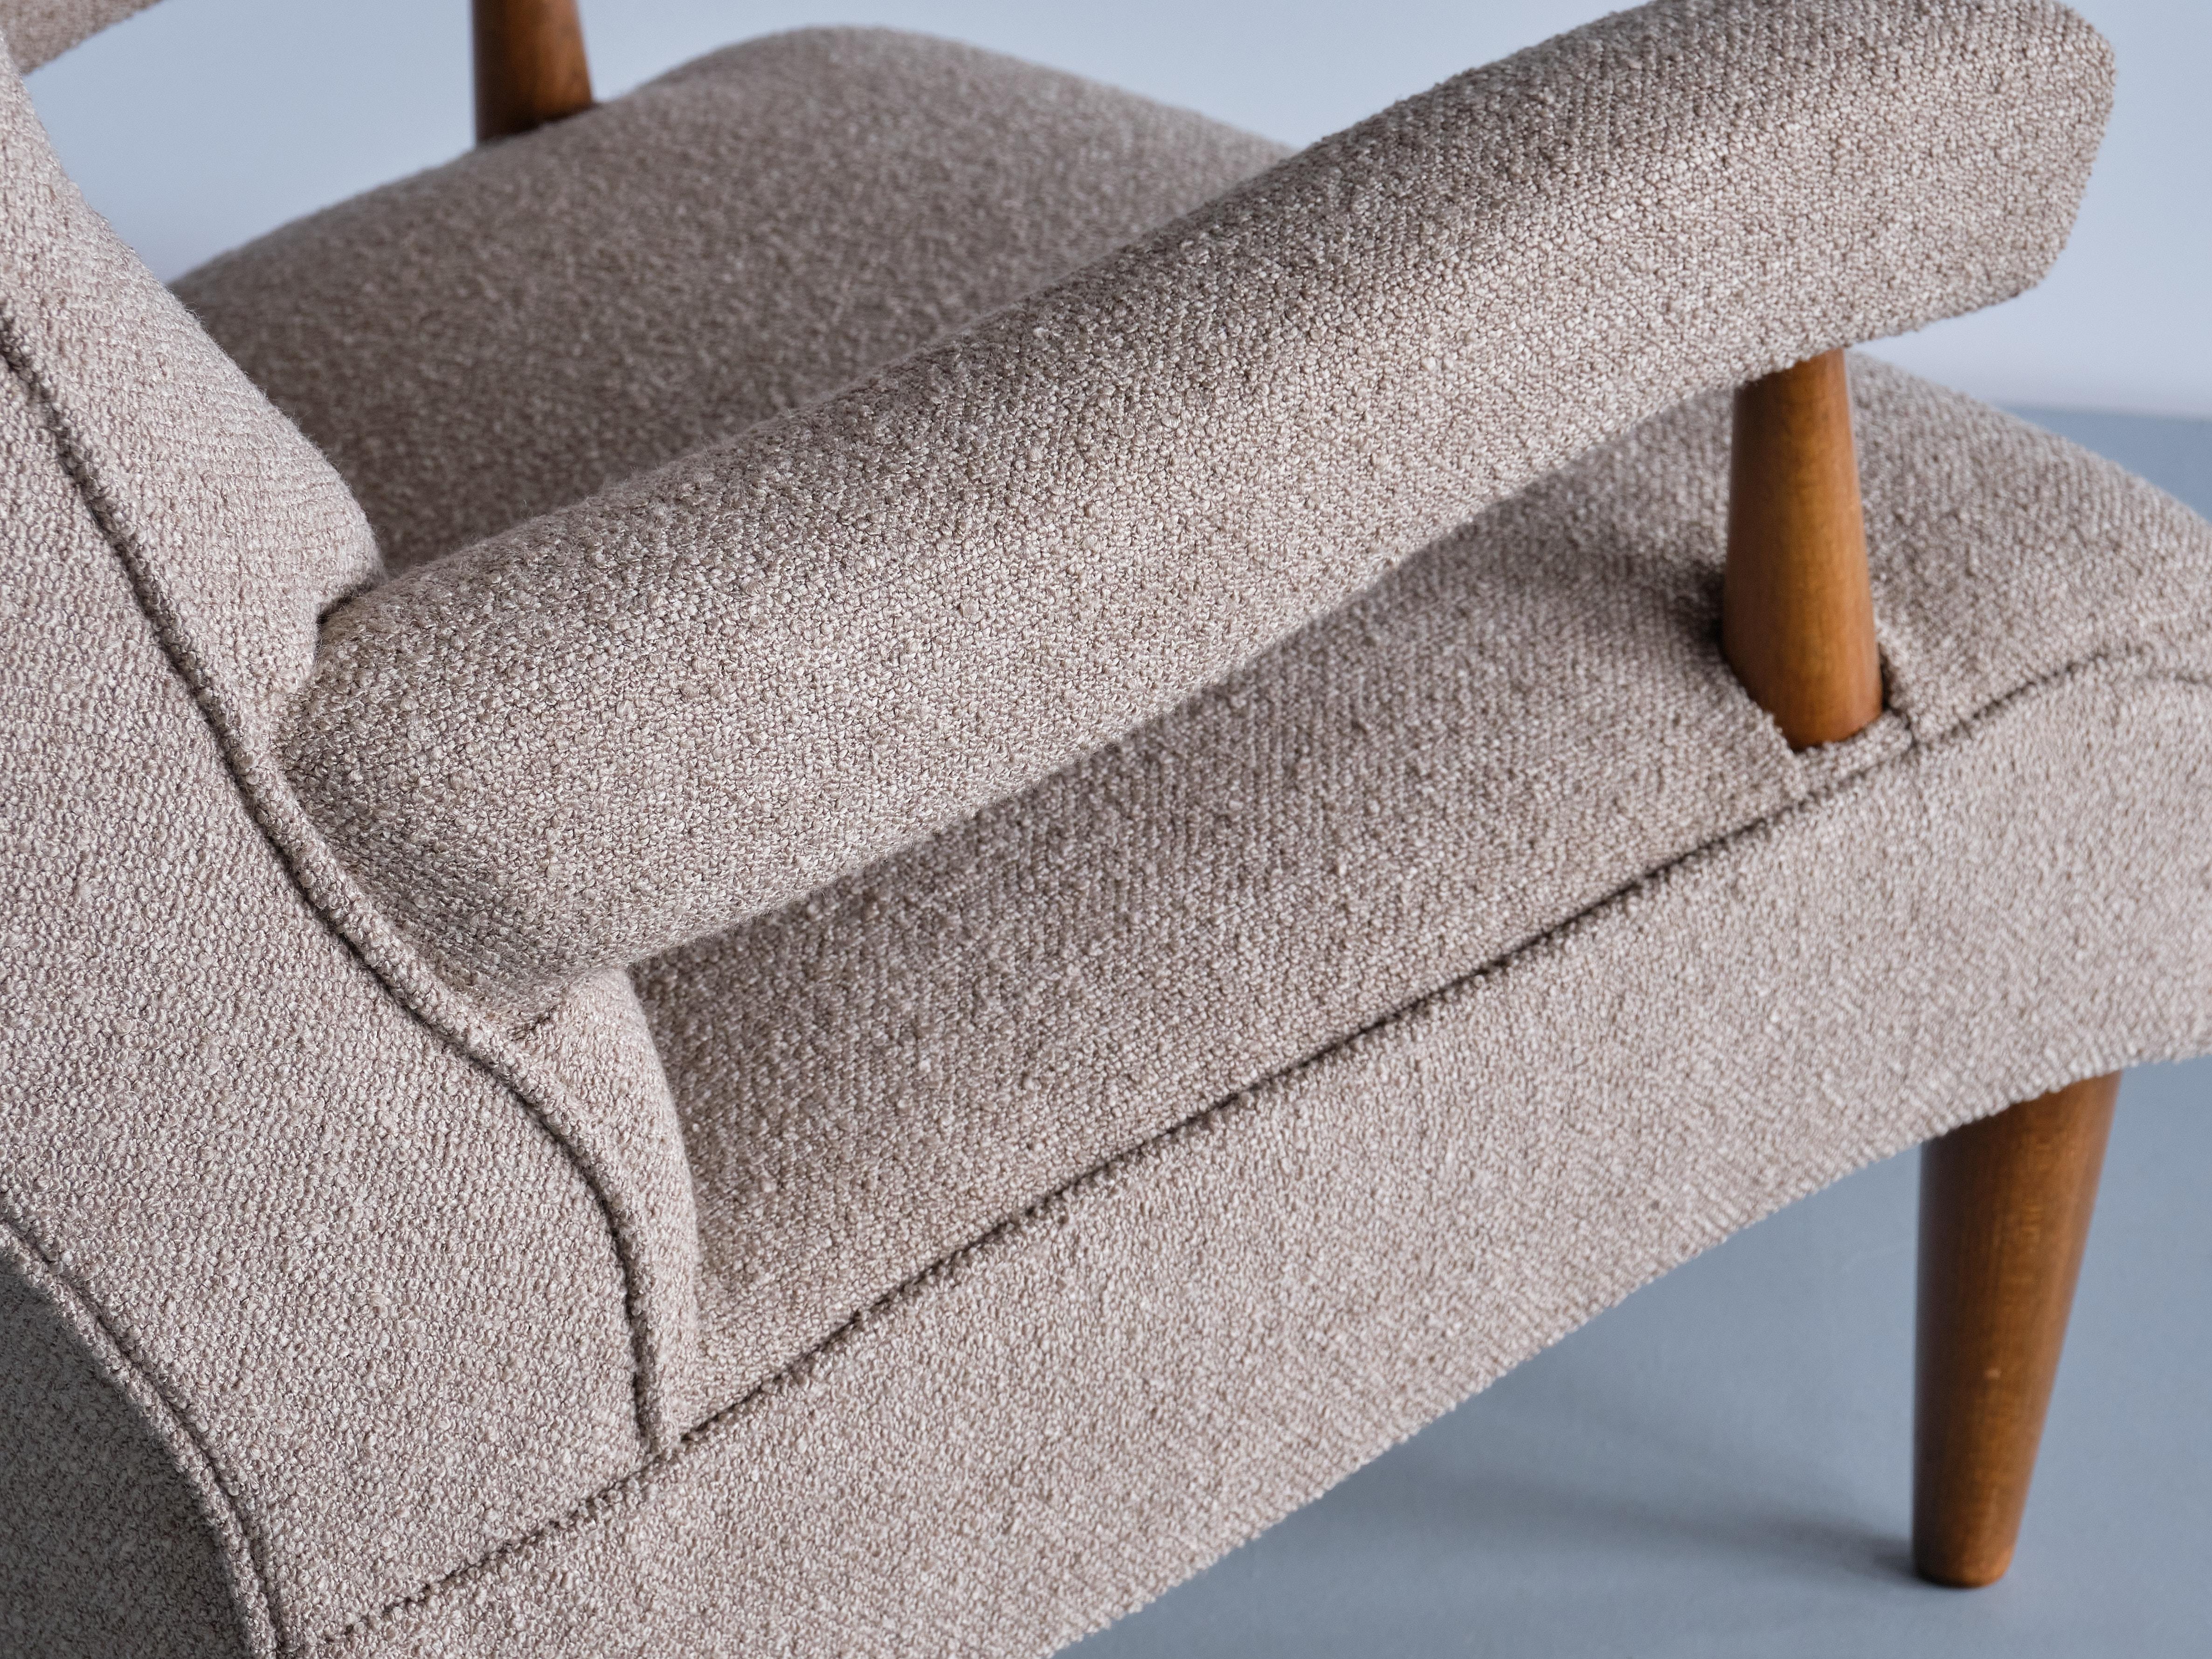 Tage Westberg Armchair in Bouclé and Beech Wood, Sweden, 1960s For Sale 2